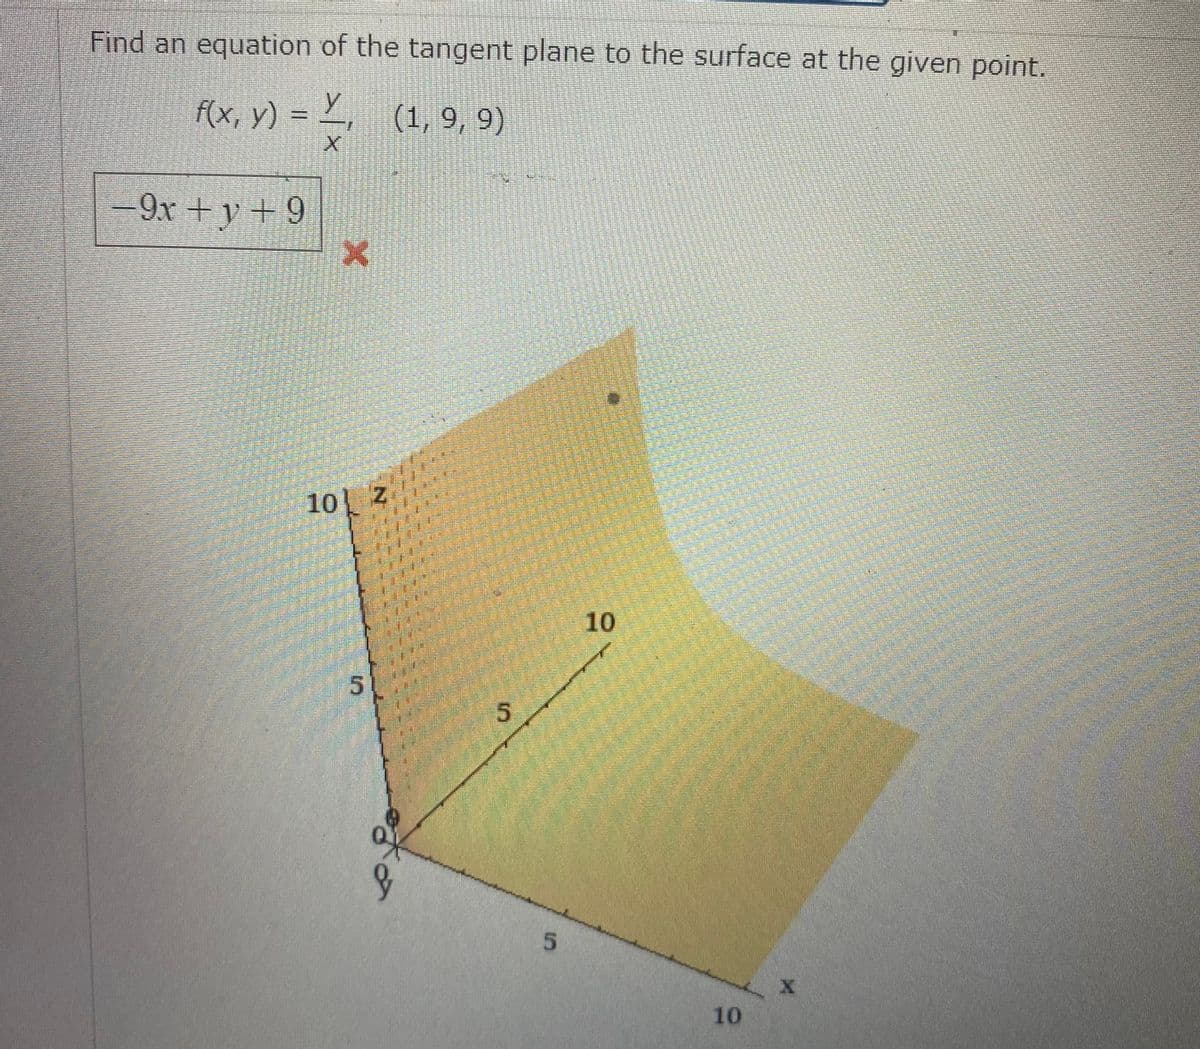 Find an equation of the tangent plane to the surface at the given point.
f(x, y) = ₁
y₁
X
-9x+v+9
X
10 Z
5
(1, 9, 9)
&
E
5
10
10